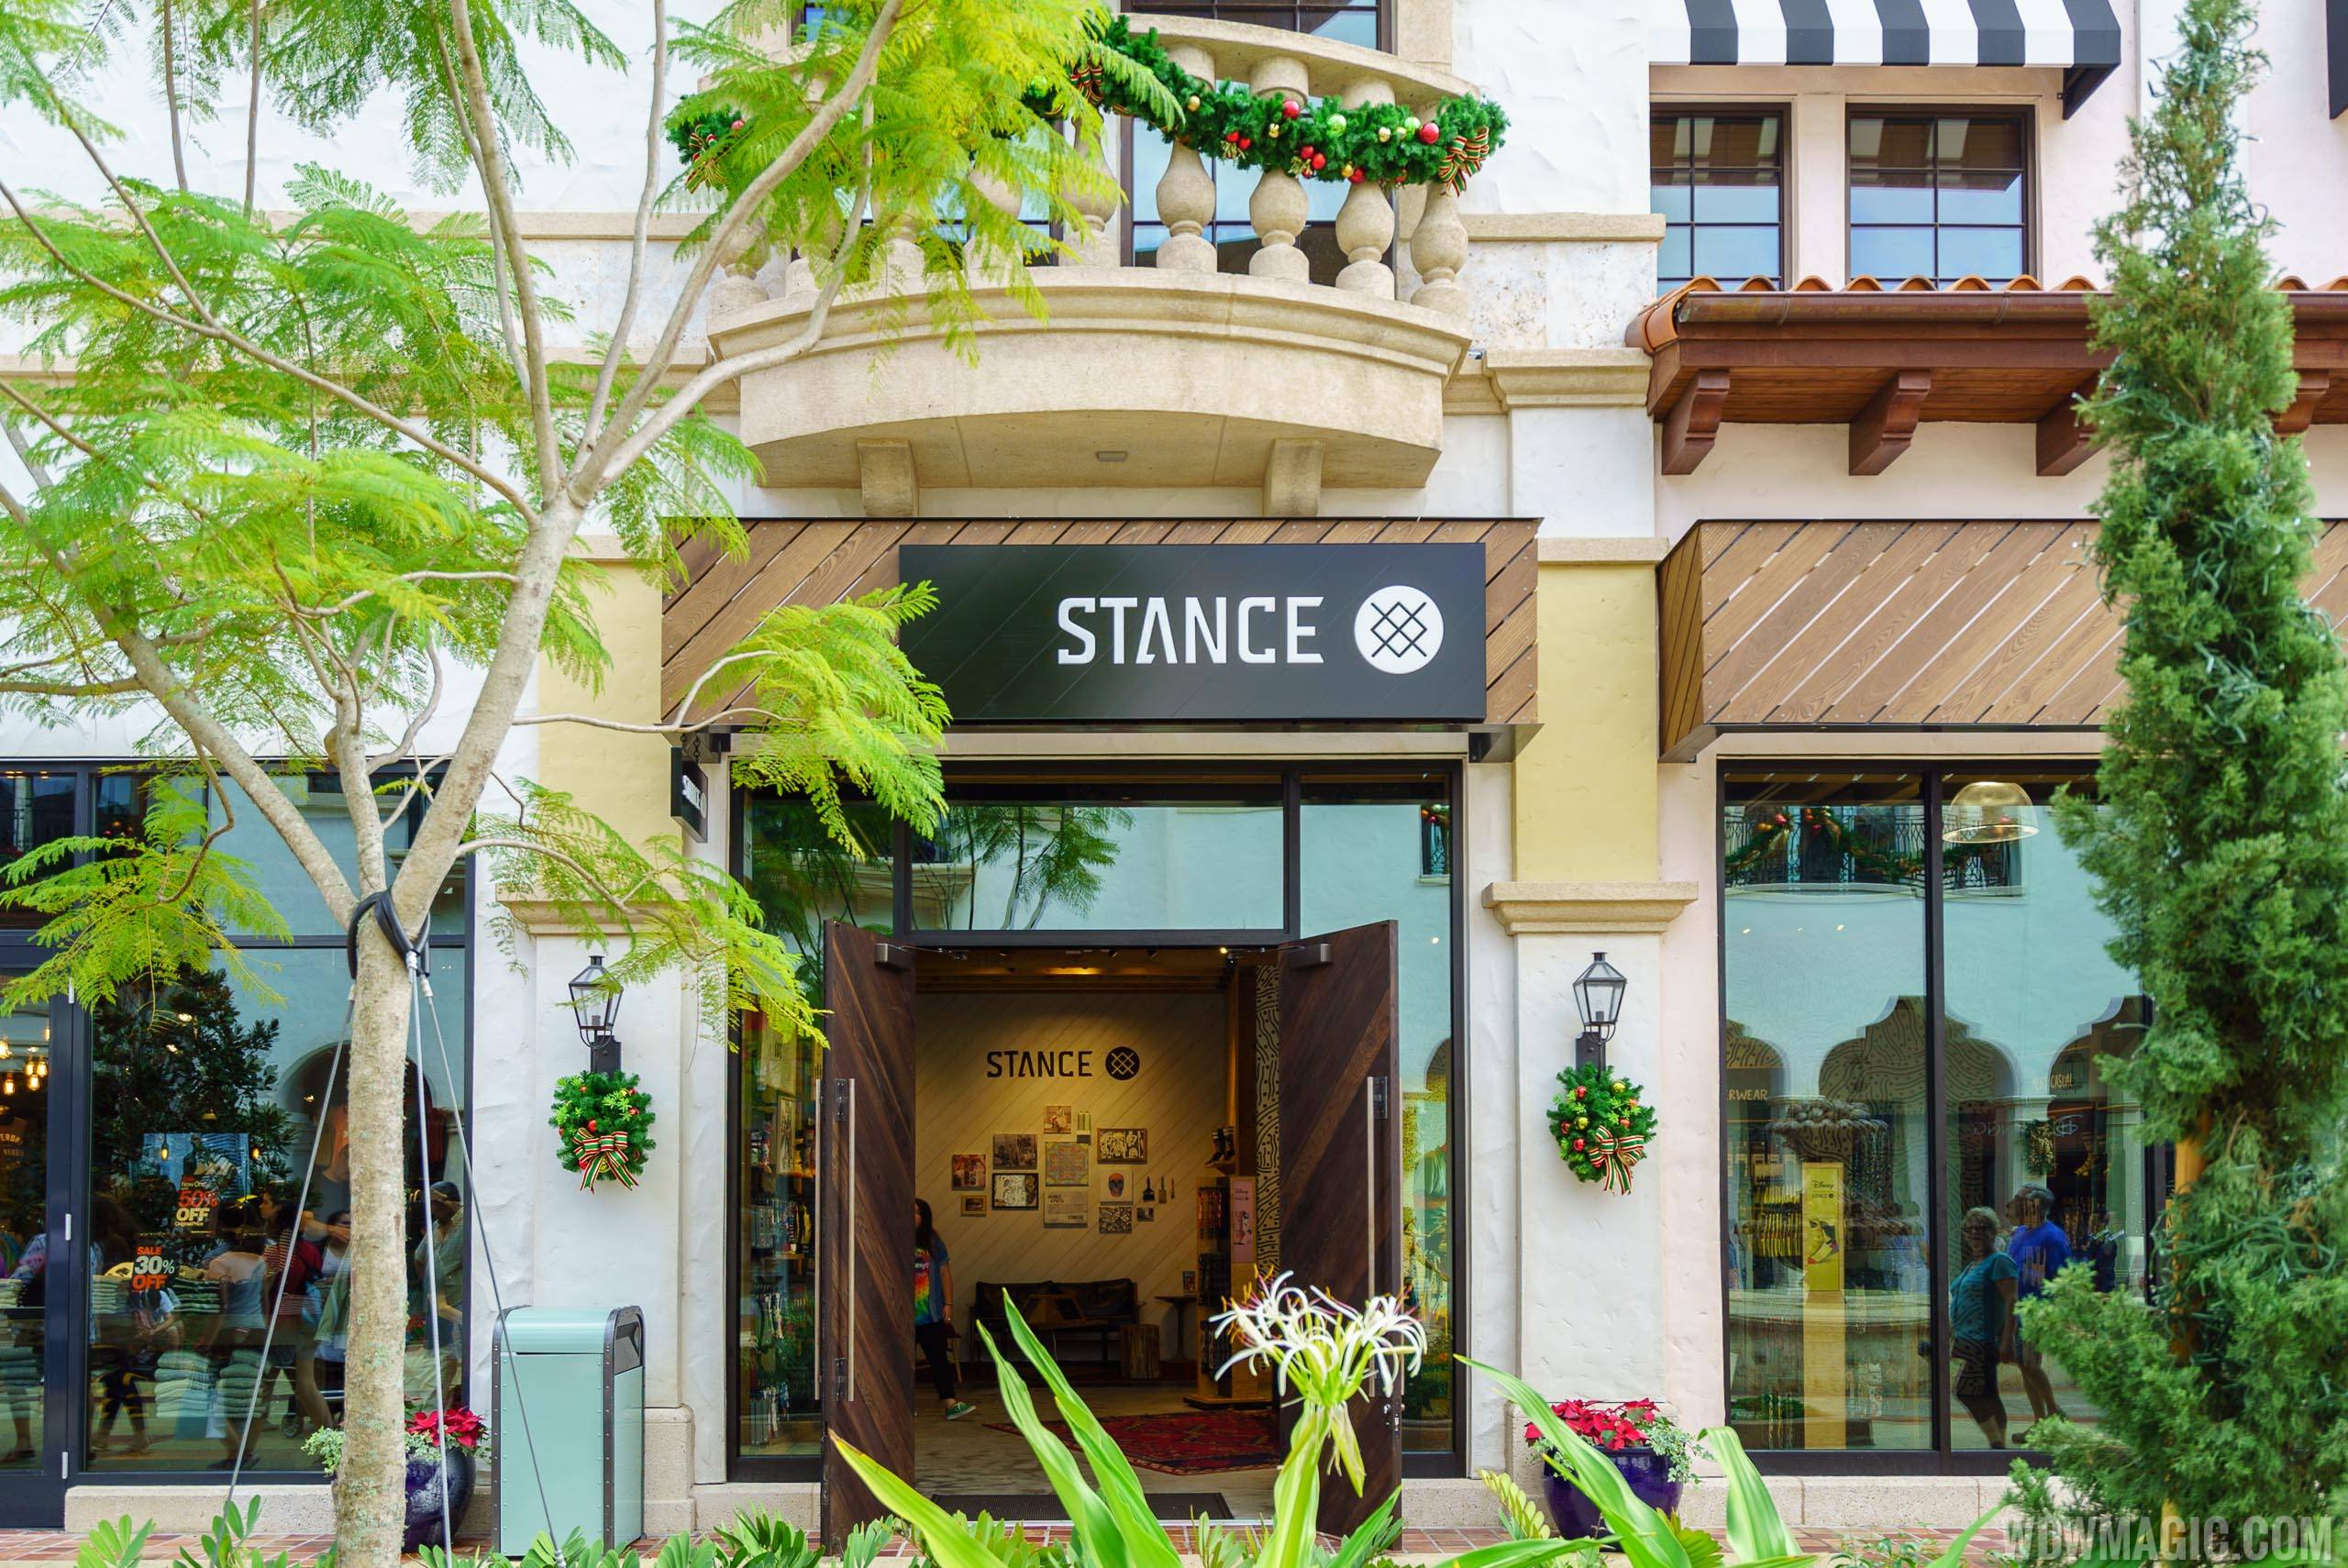 PHOTOS - Stance high-end sock store opens at Disney Springs